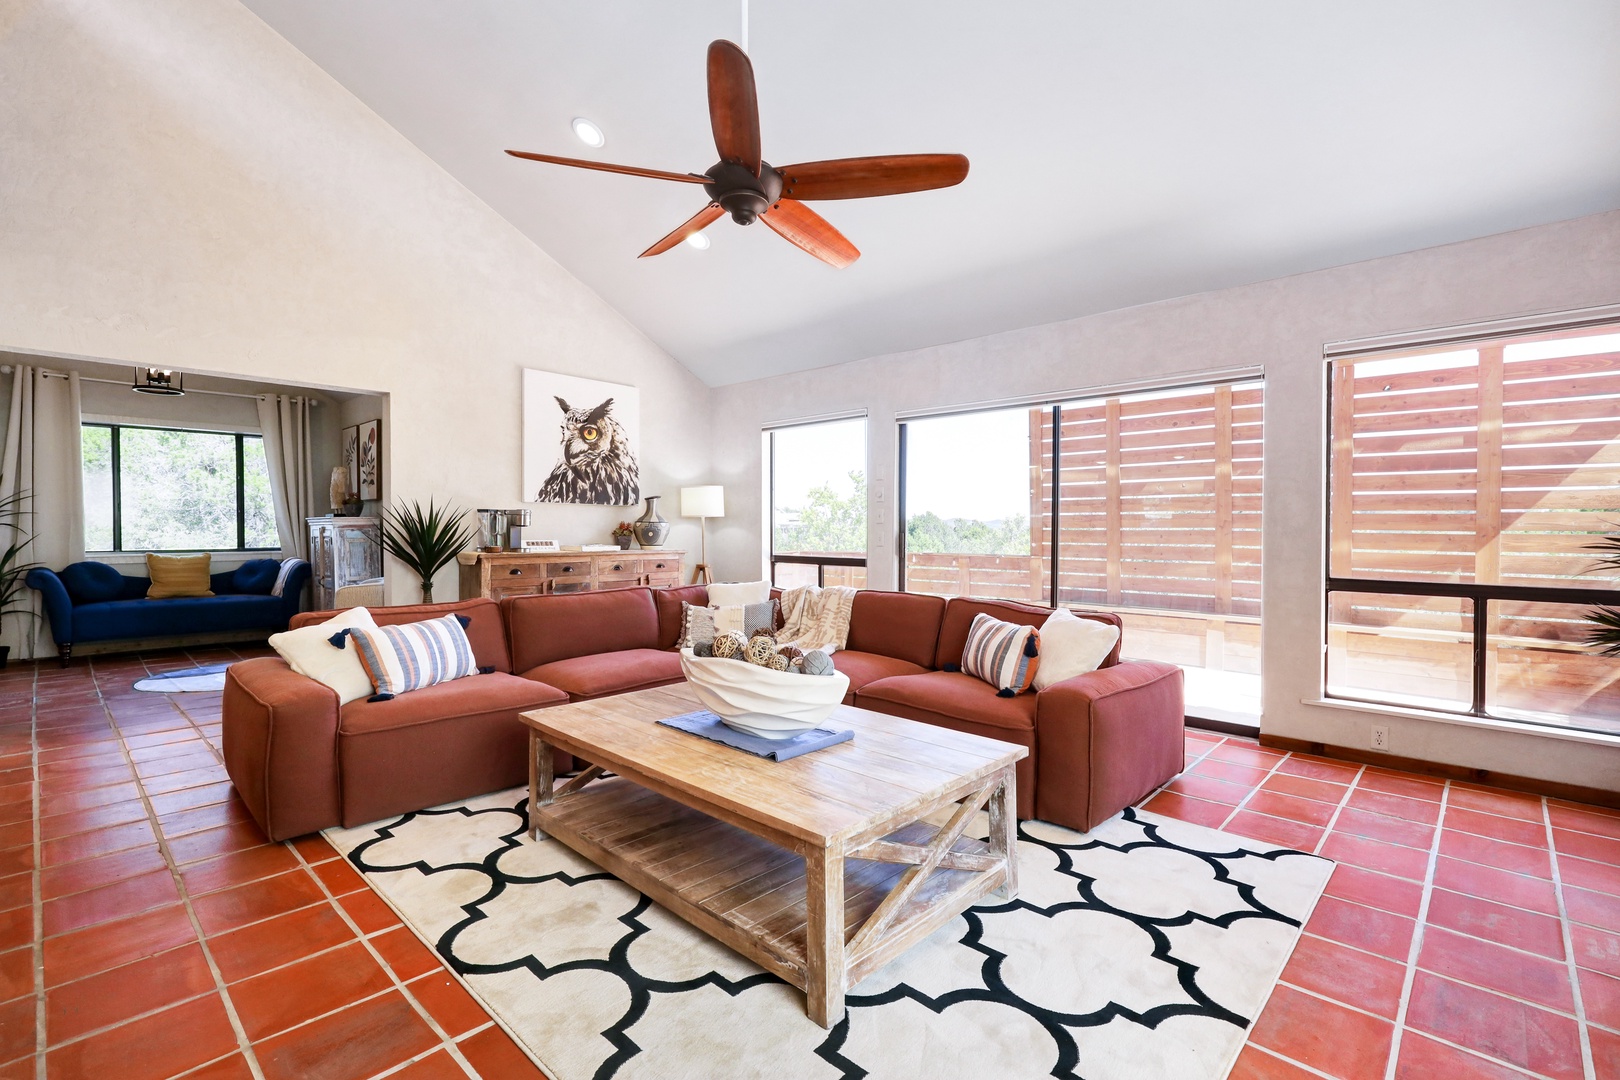 Unwind with a book in the spacious hacienda living room